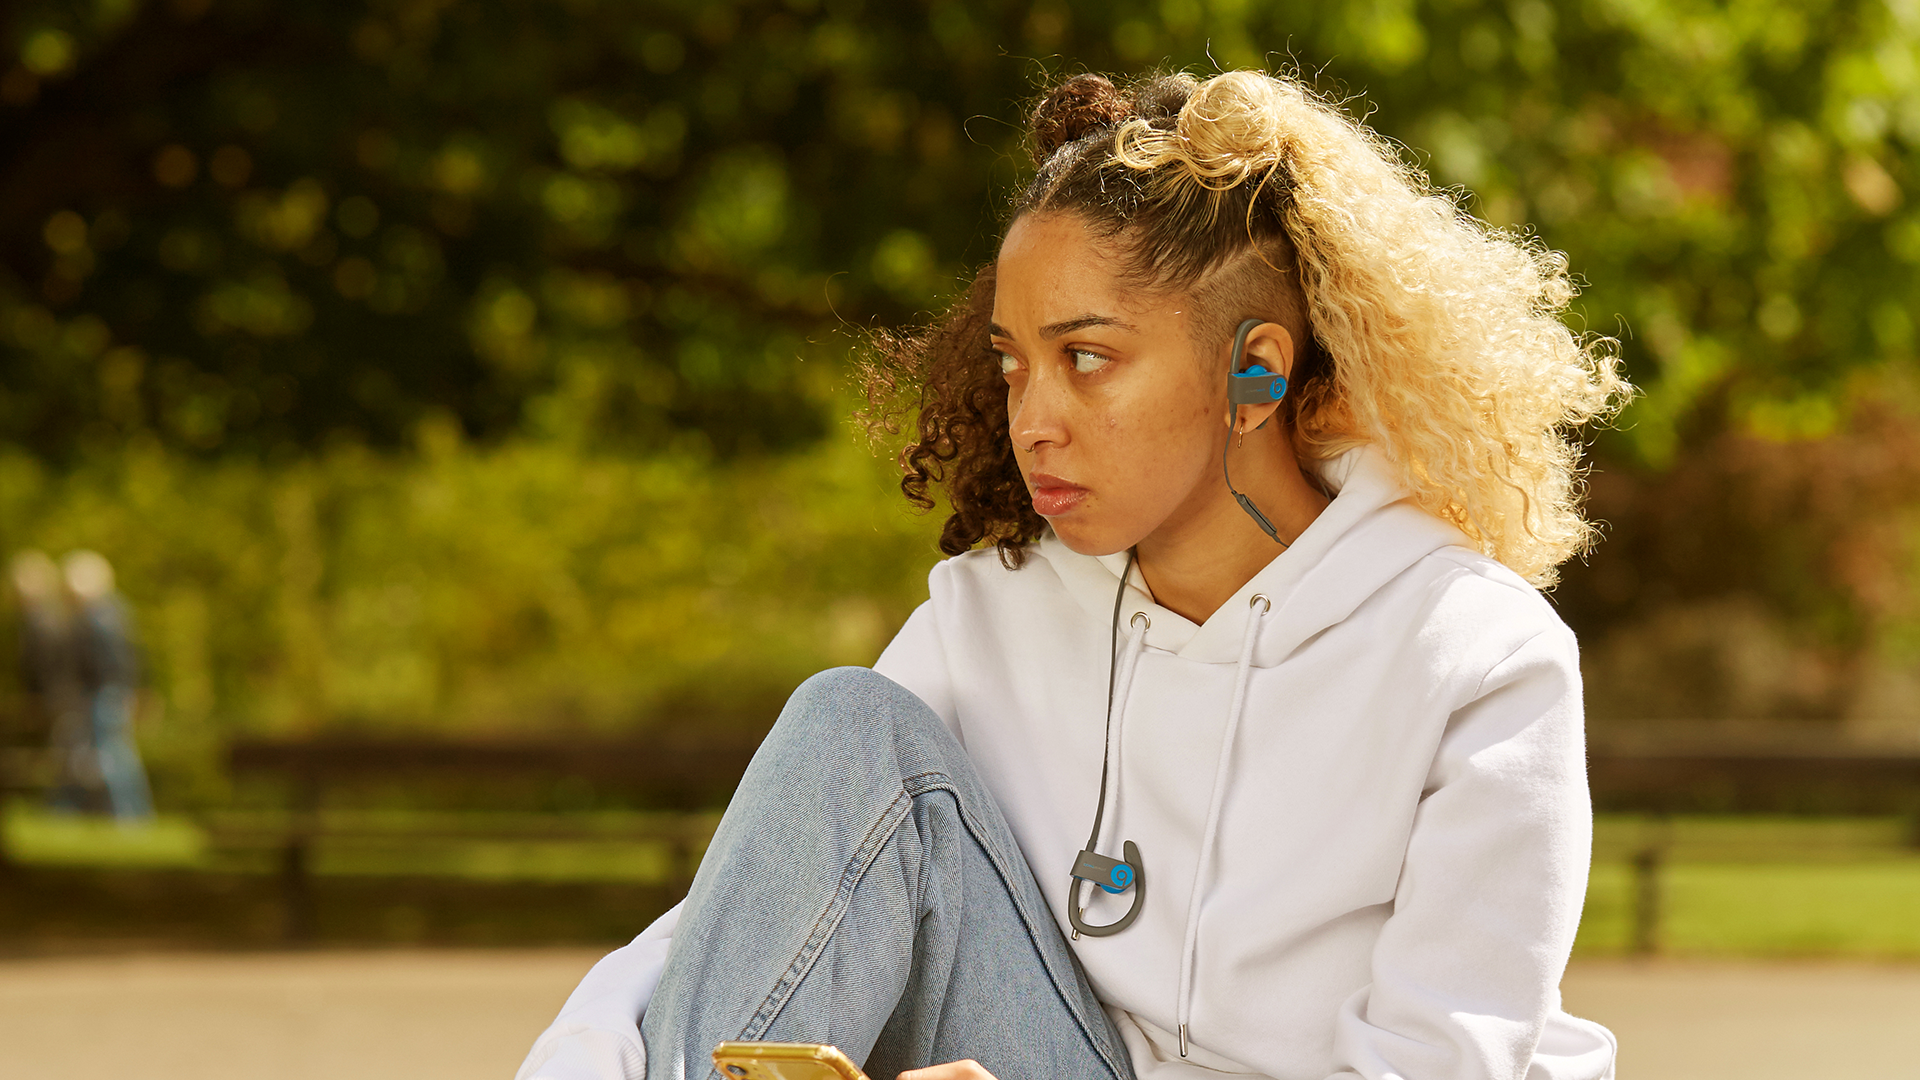 A girl listening to music in the park looking worried.